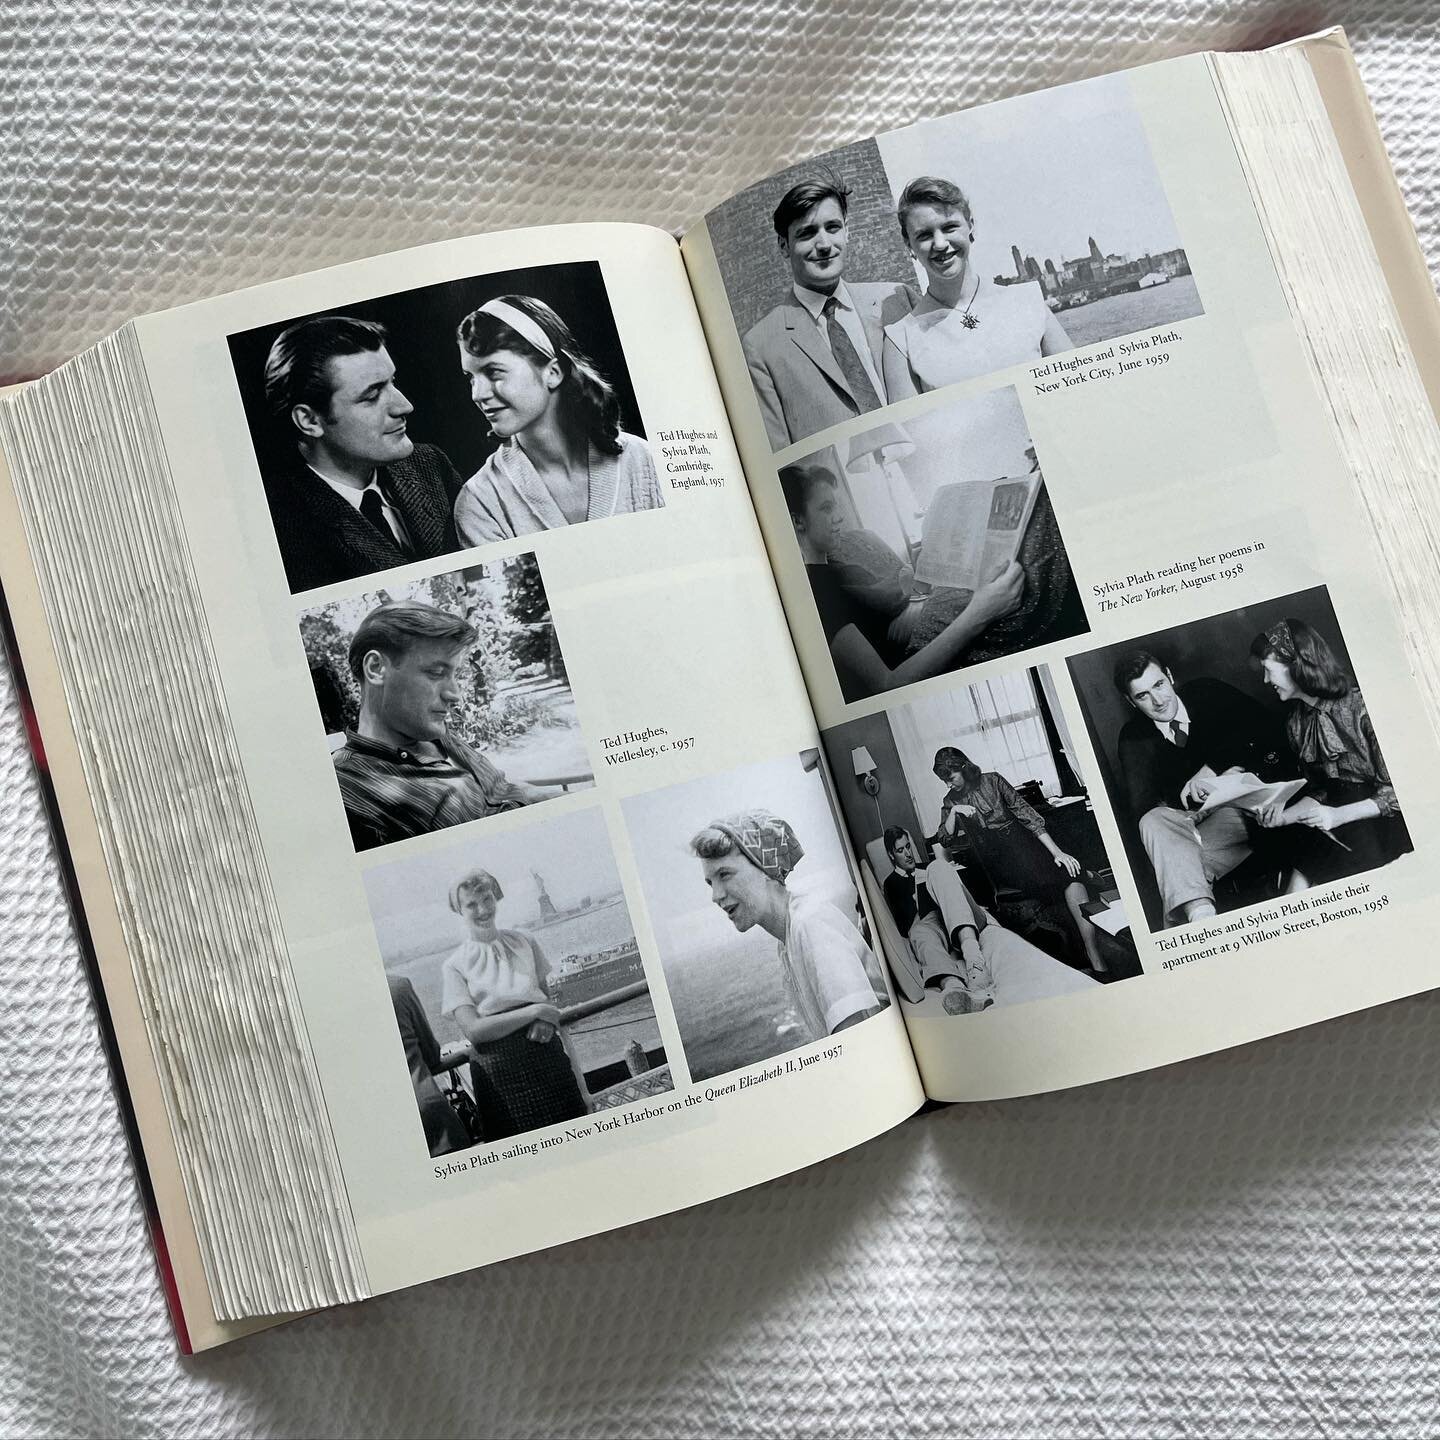 happy 91st birthday sylvia plath 🎈it&rsquo;s wildly fitting that I *finally* finished this behemoth of a biography about her two days ago ~ it&rsquo;s the biggest book I&rsquo;ve ever read &amp; has taken me almost all year lol&hellip;1000+ pages or